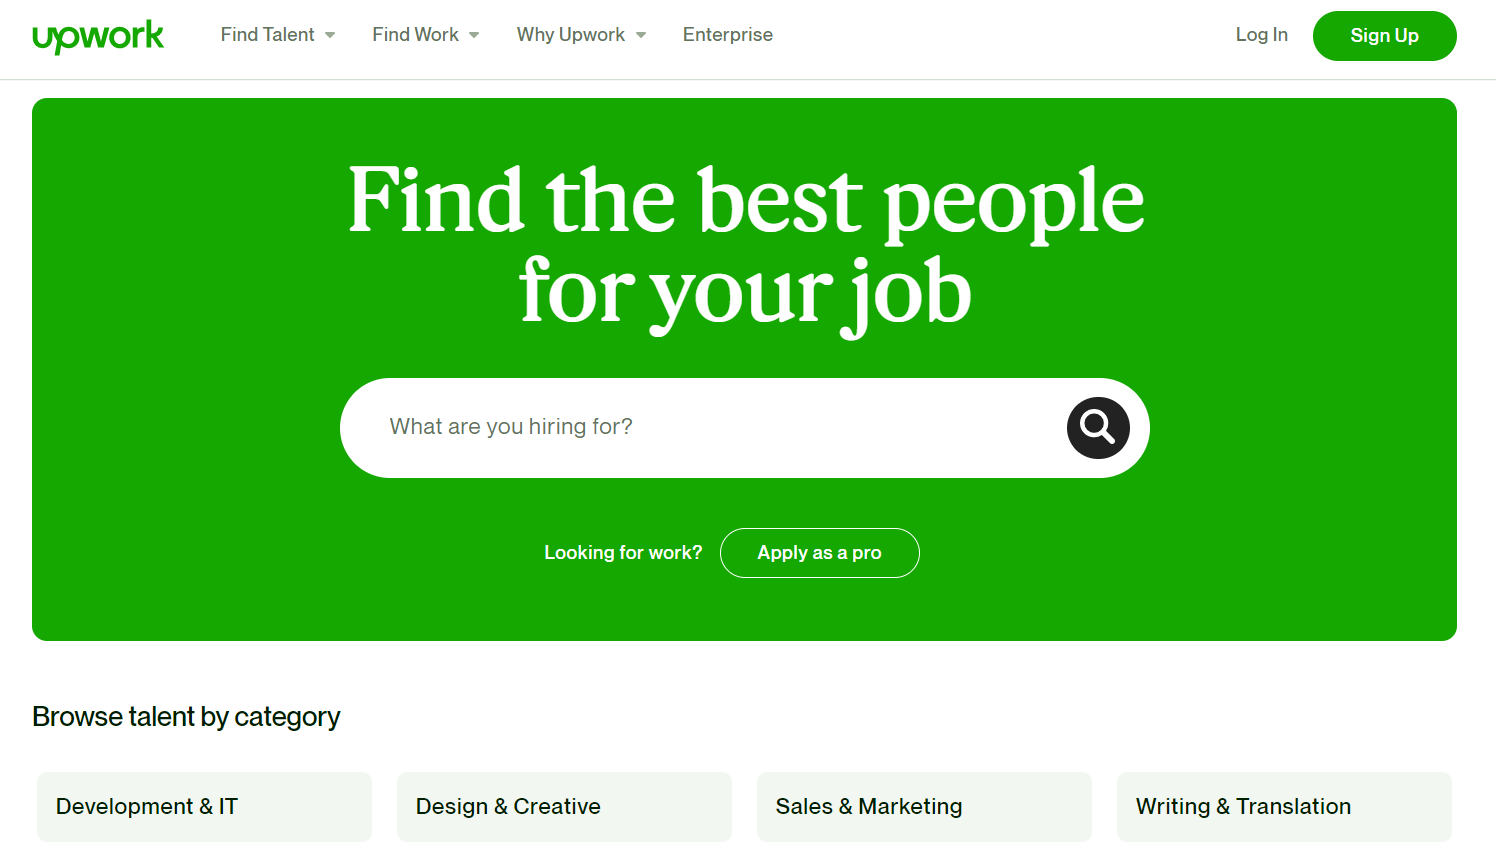 find-the-best-people-for-your-job-image